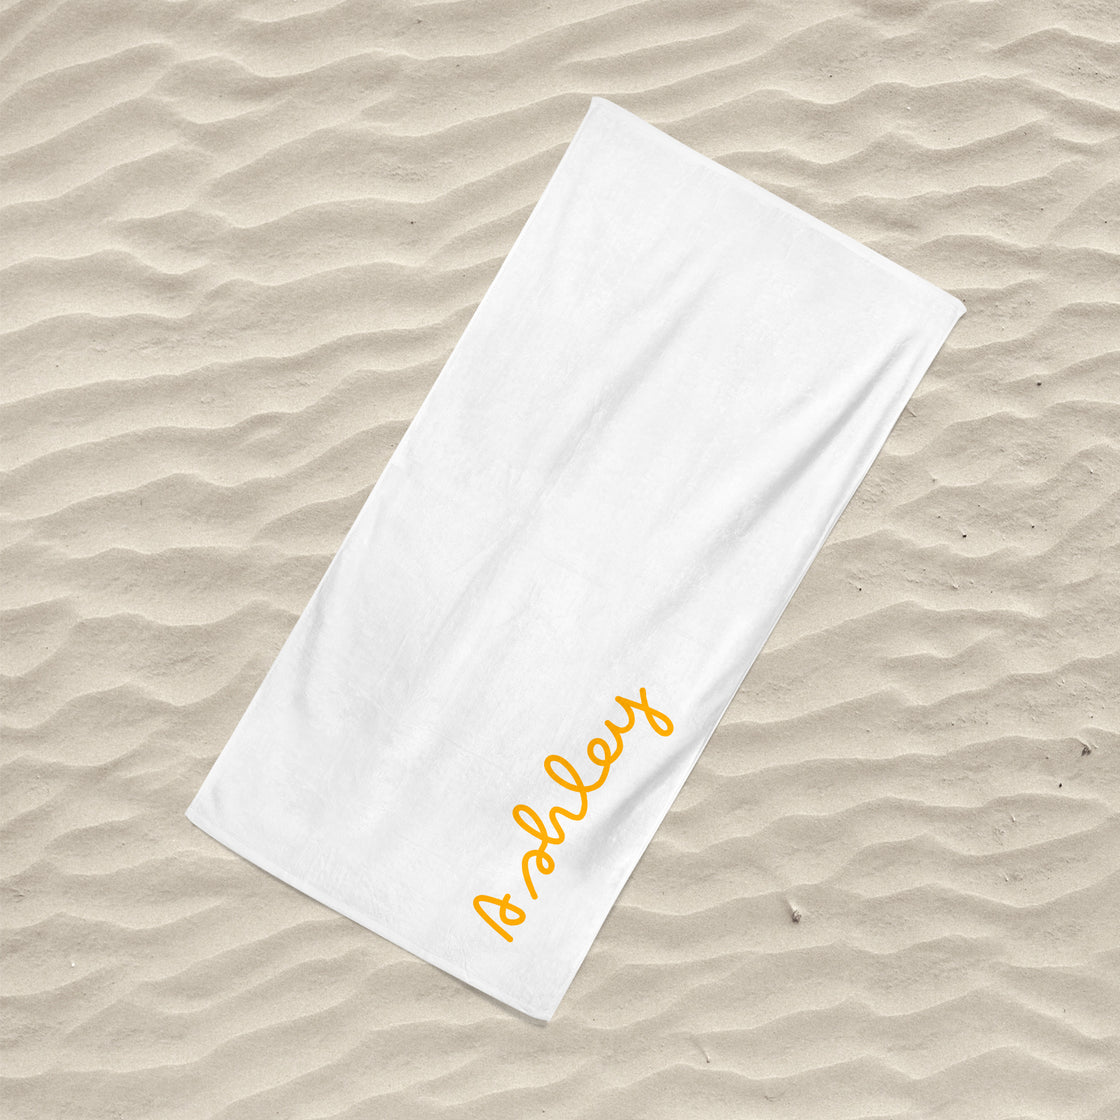 Island Inspired Large Beach Towel Orange on White - Personalise with Name